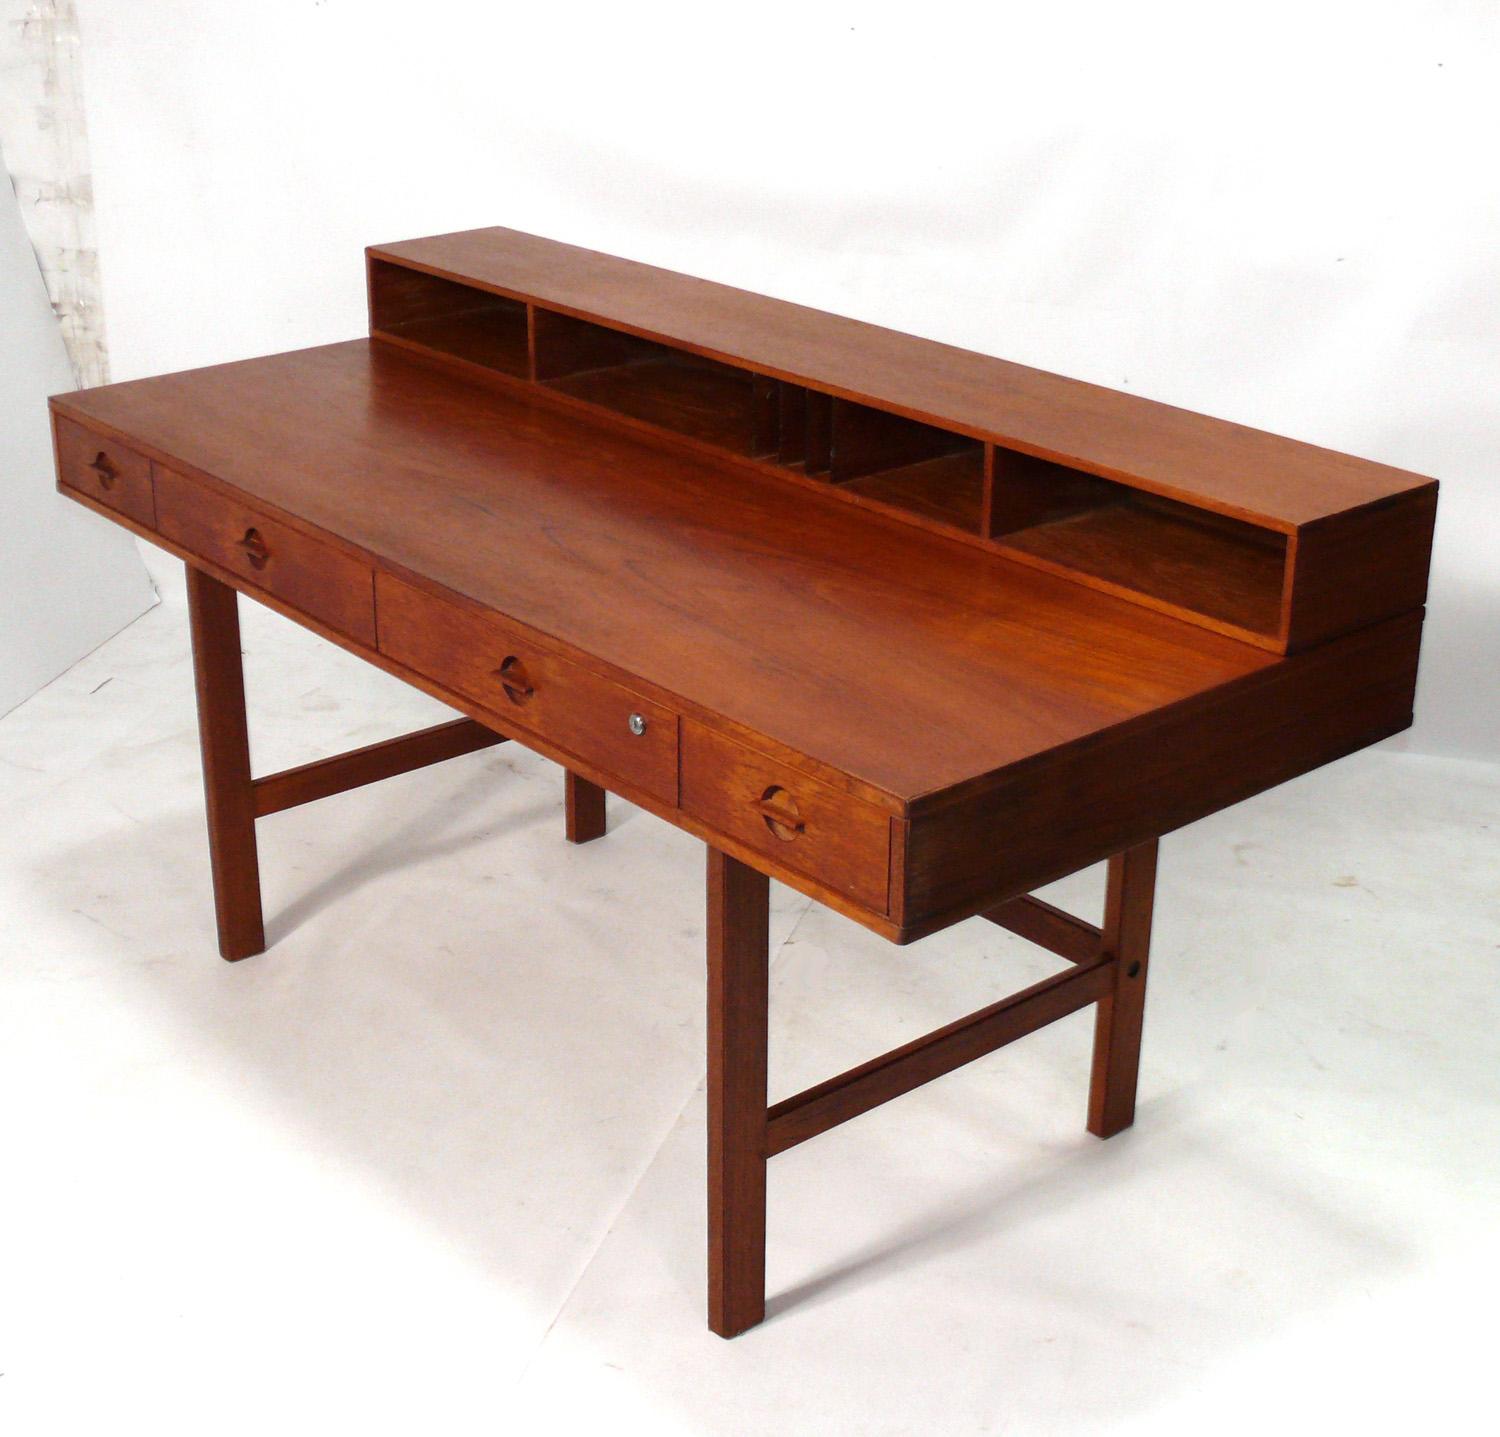 Clean lined Danish Modern teak desk, designed by Peter Lovig Nielsen for Lovig, Denmark, circa 1960s. This desk is currently being refinished and will look incredible when completed. The price noted includes refinishing. The desk has an ingenius